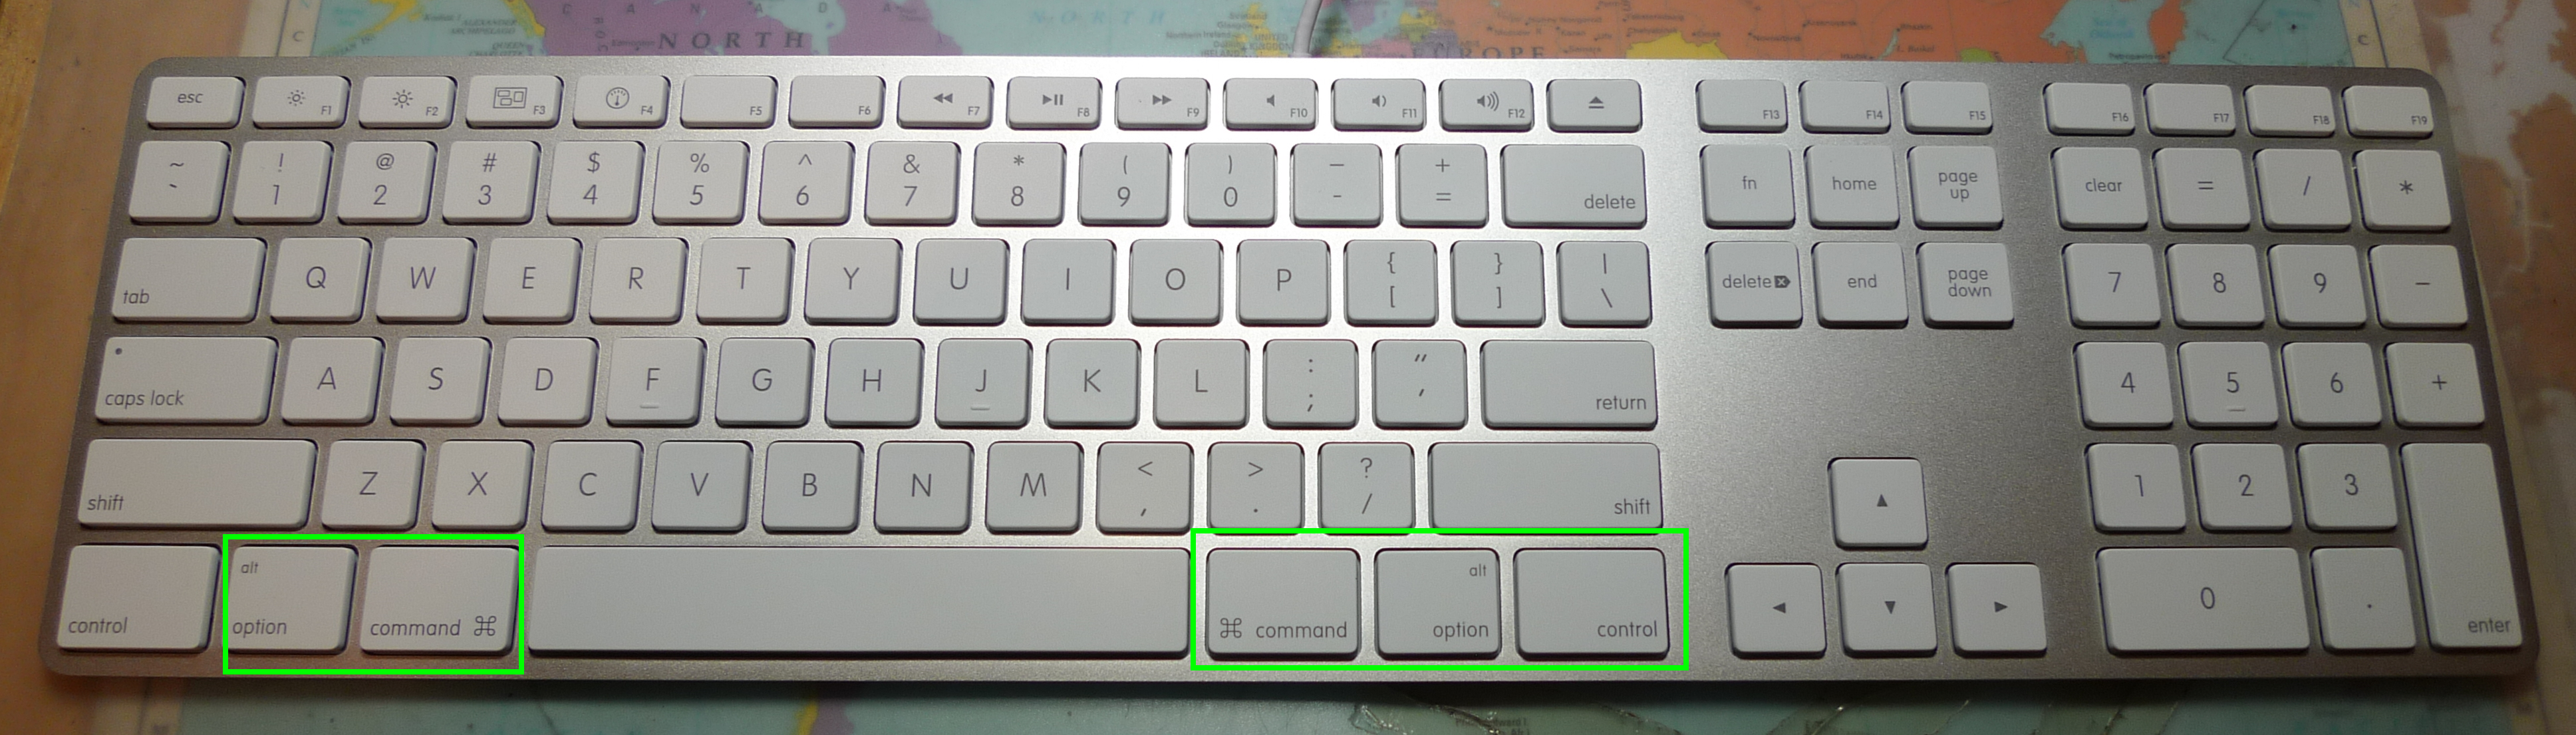 Apple keyboard with Command and Alt in green